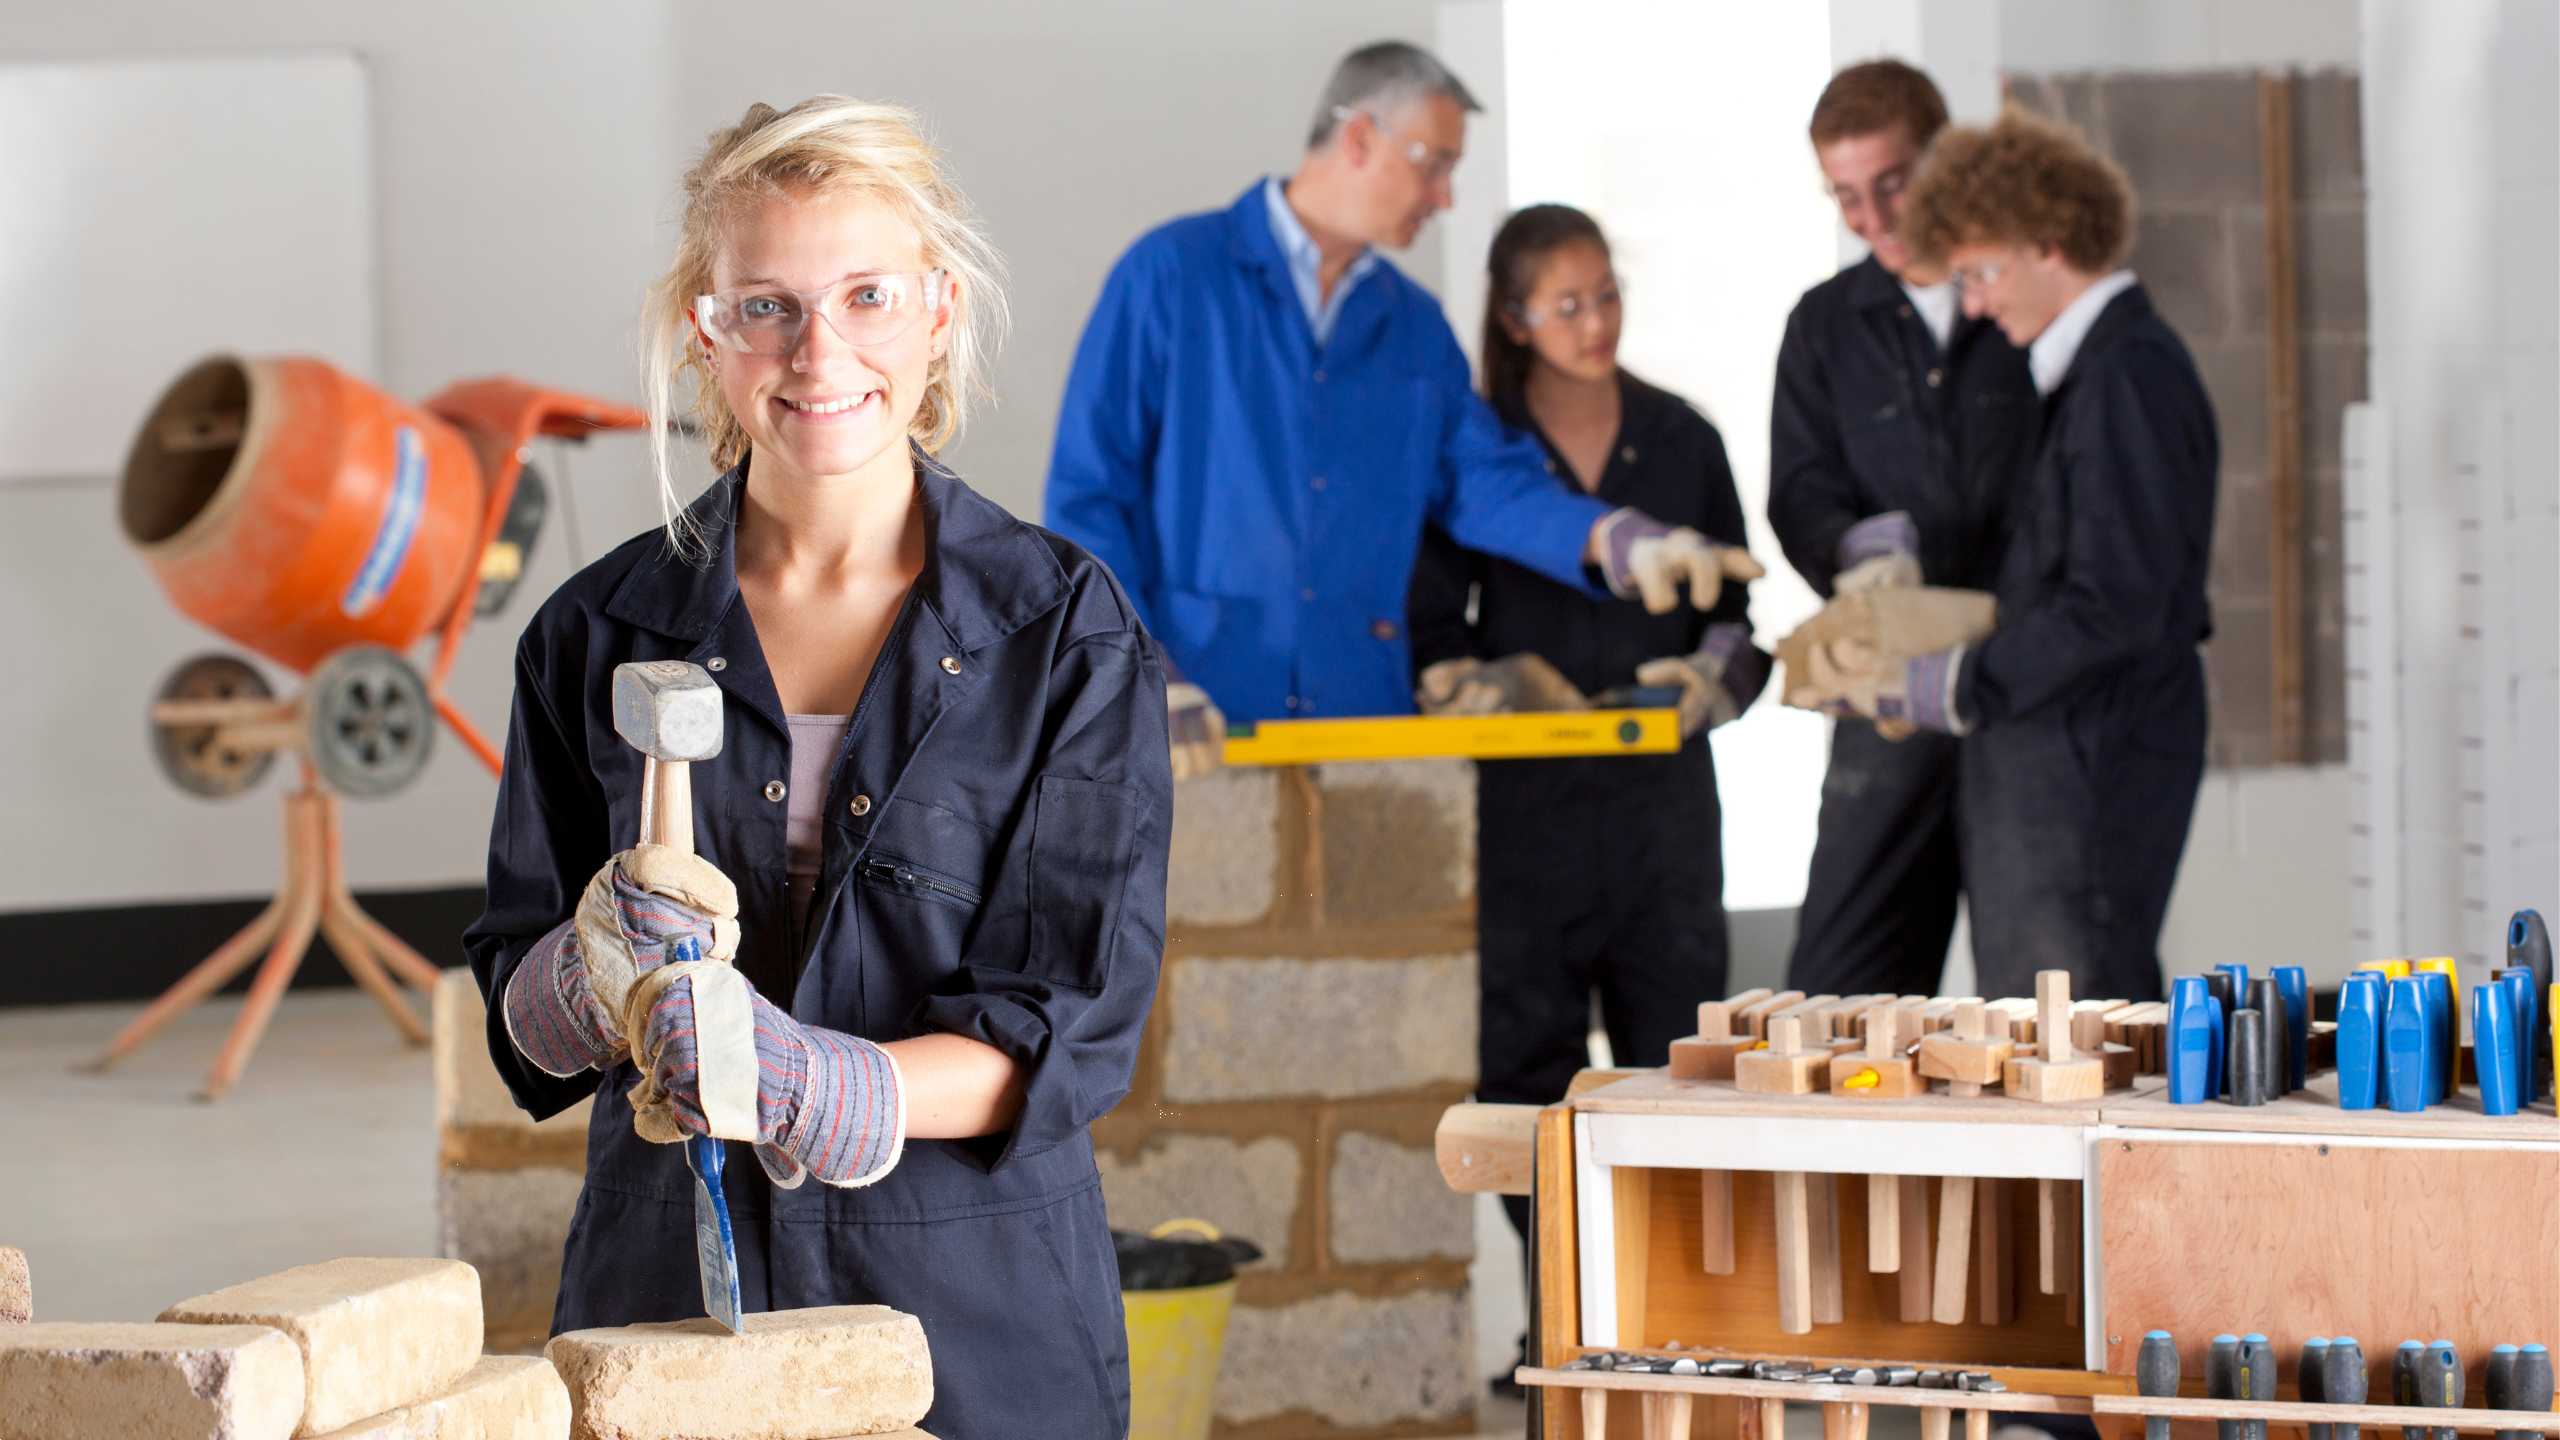 Girl in work clothes and safety glasses with tools with people in the background